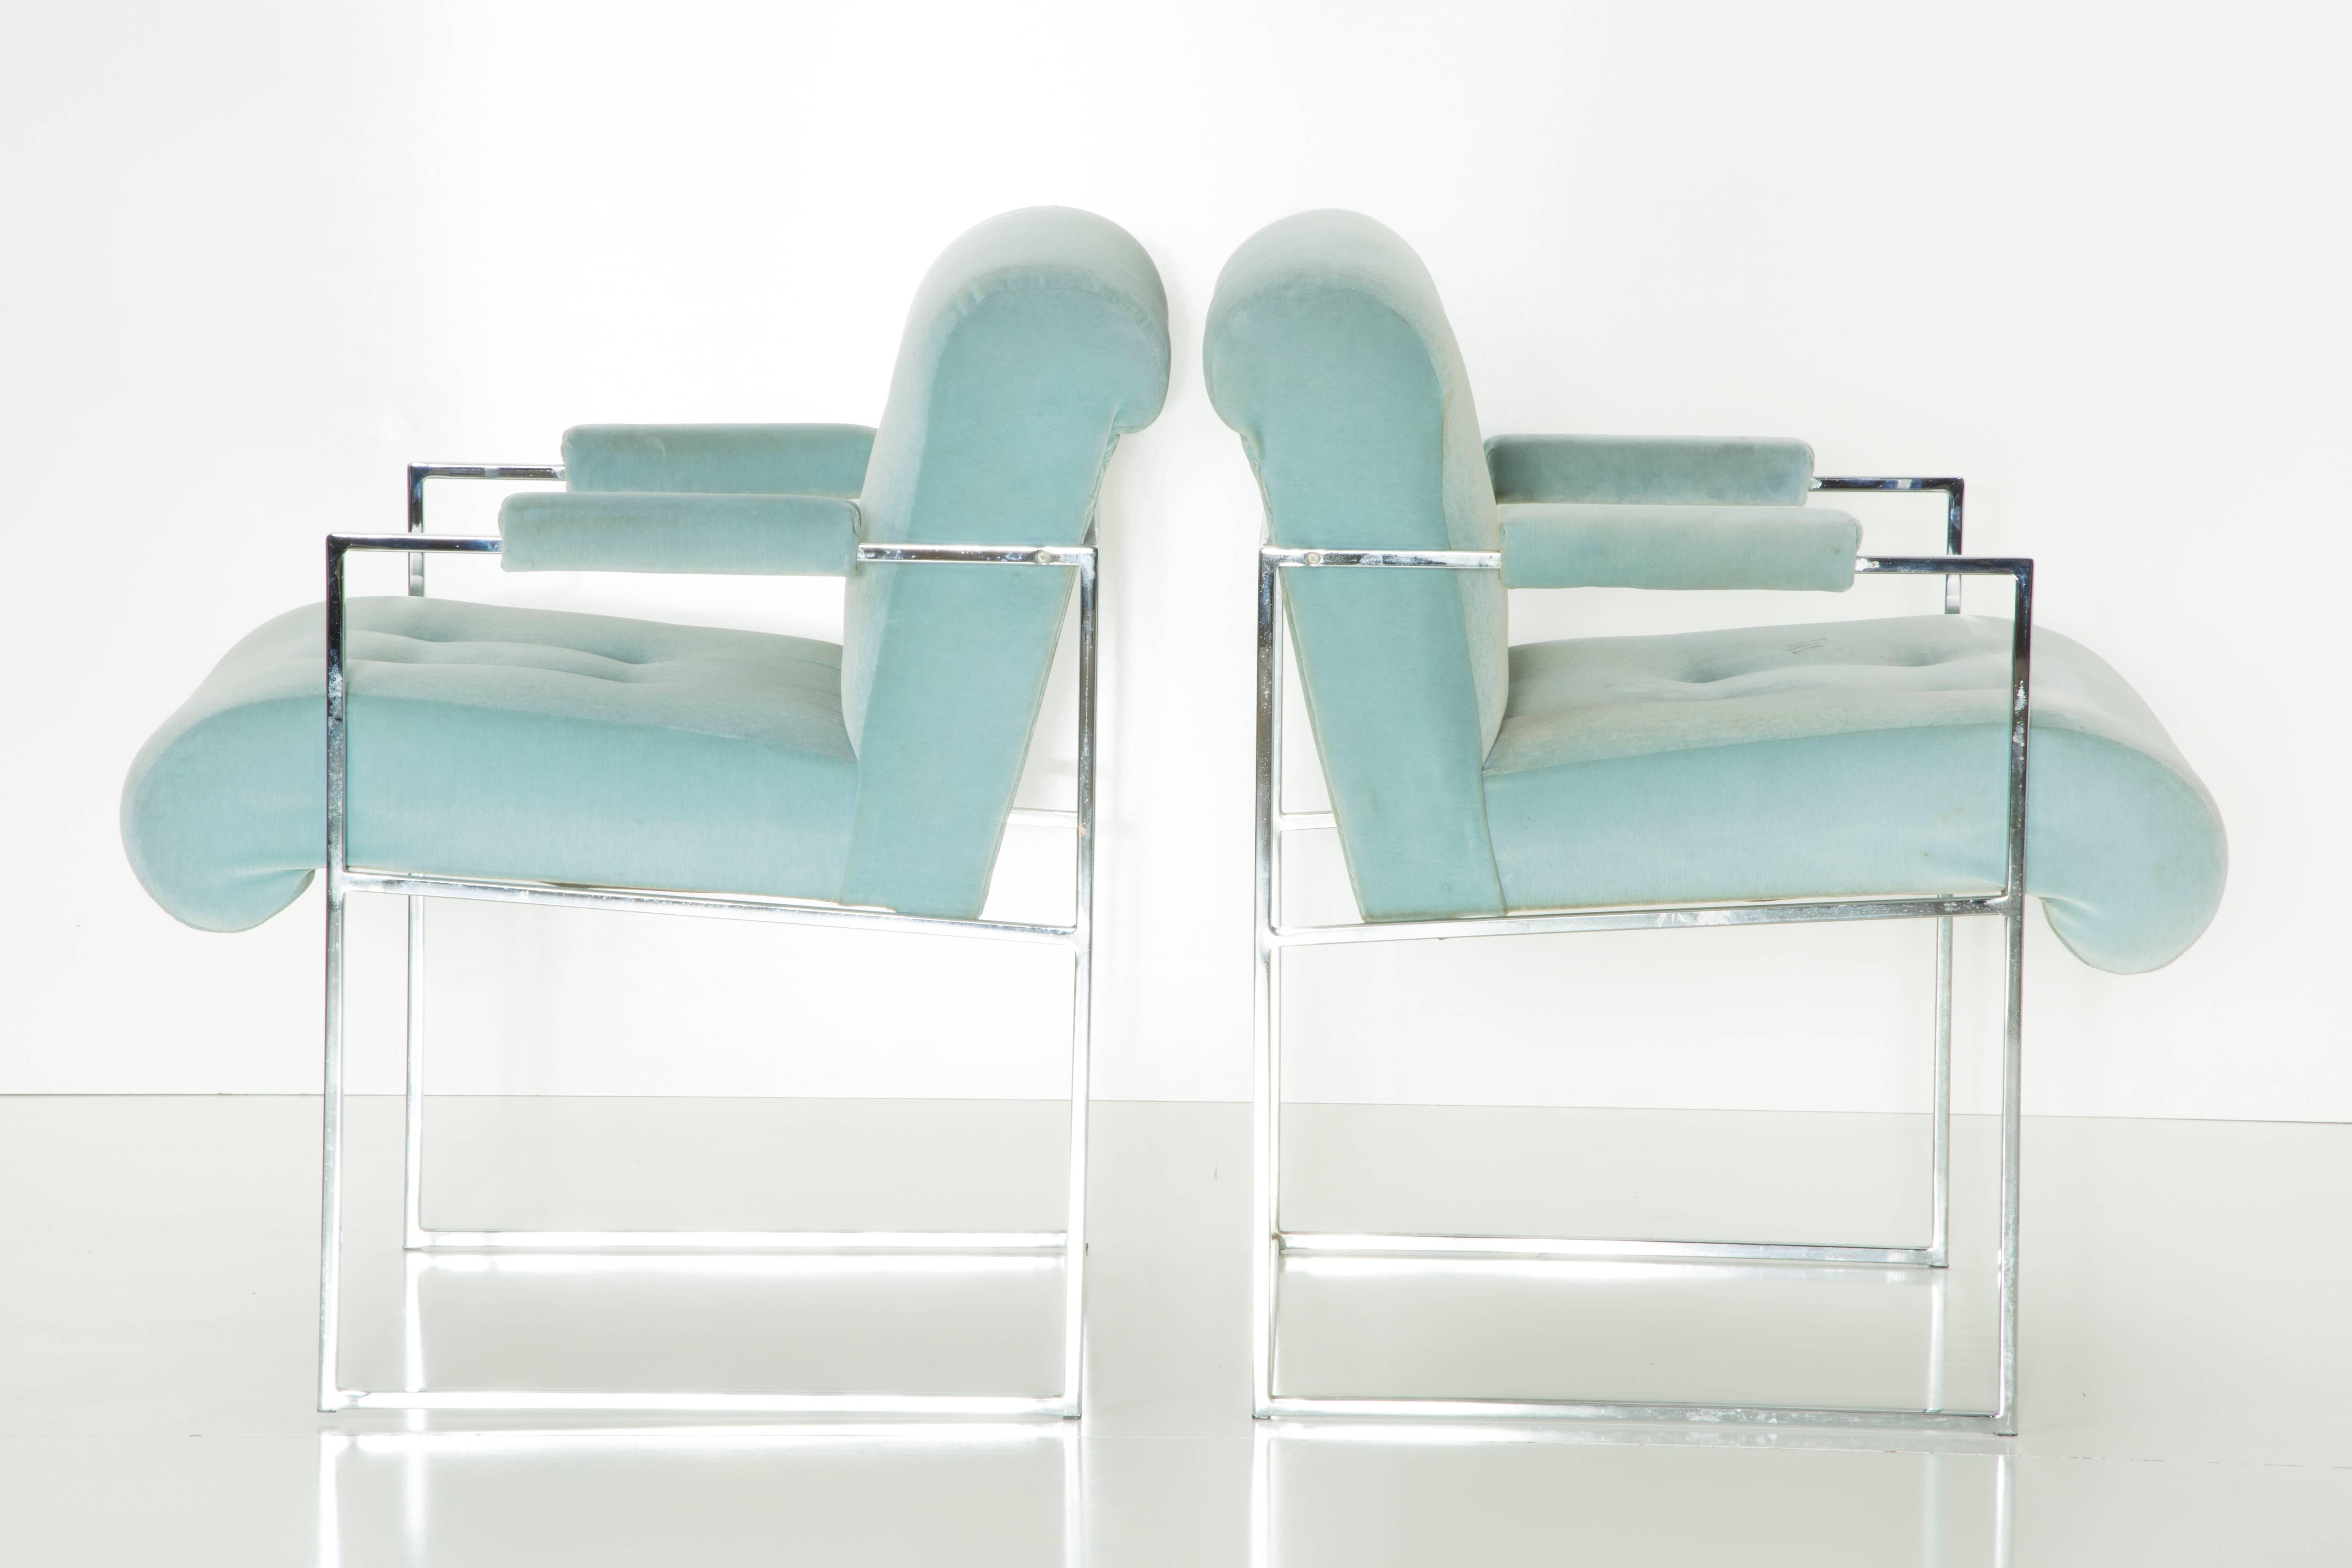 This iconic pair of Milo Baughman chairs are upholstered in a fantastic retro seafoam / sky blue velour upholstery with a chrome frame. Manufactured by Thayer Coggin.

